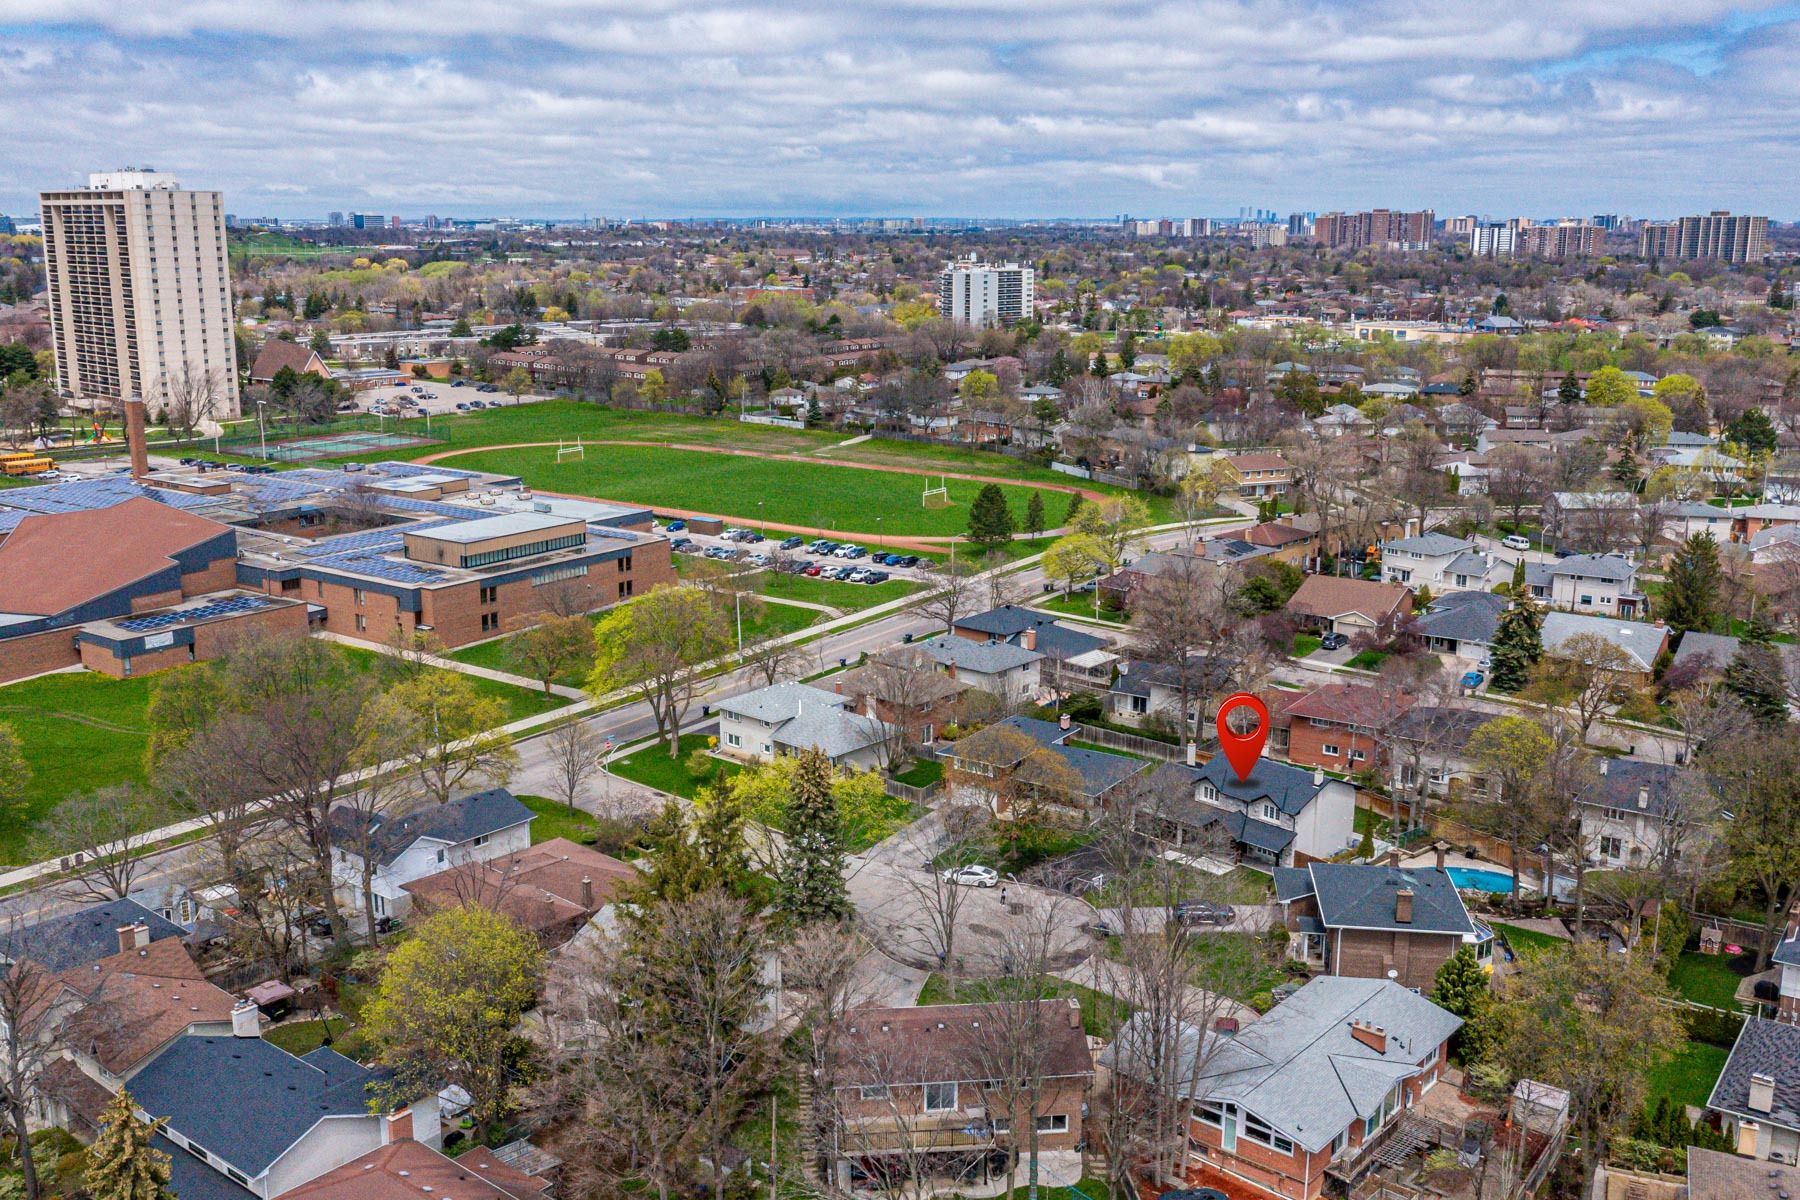 Drone photo of 3 Logwood Court and Silverthorn Collegiate school across street.